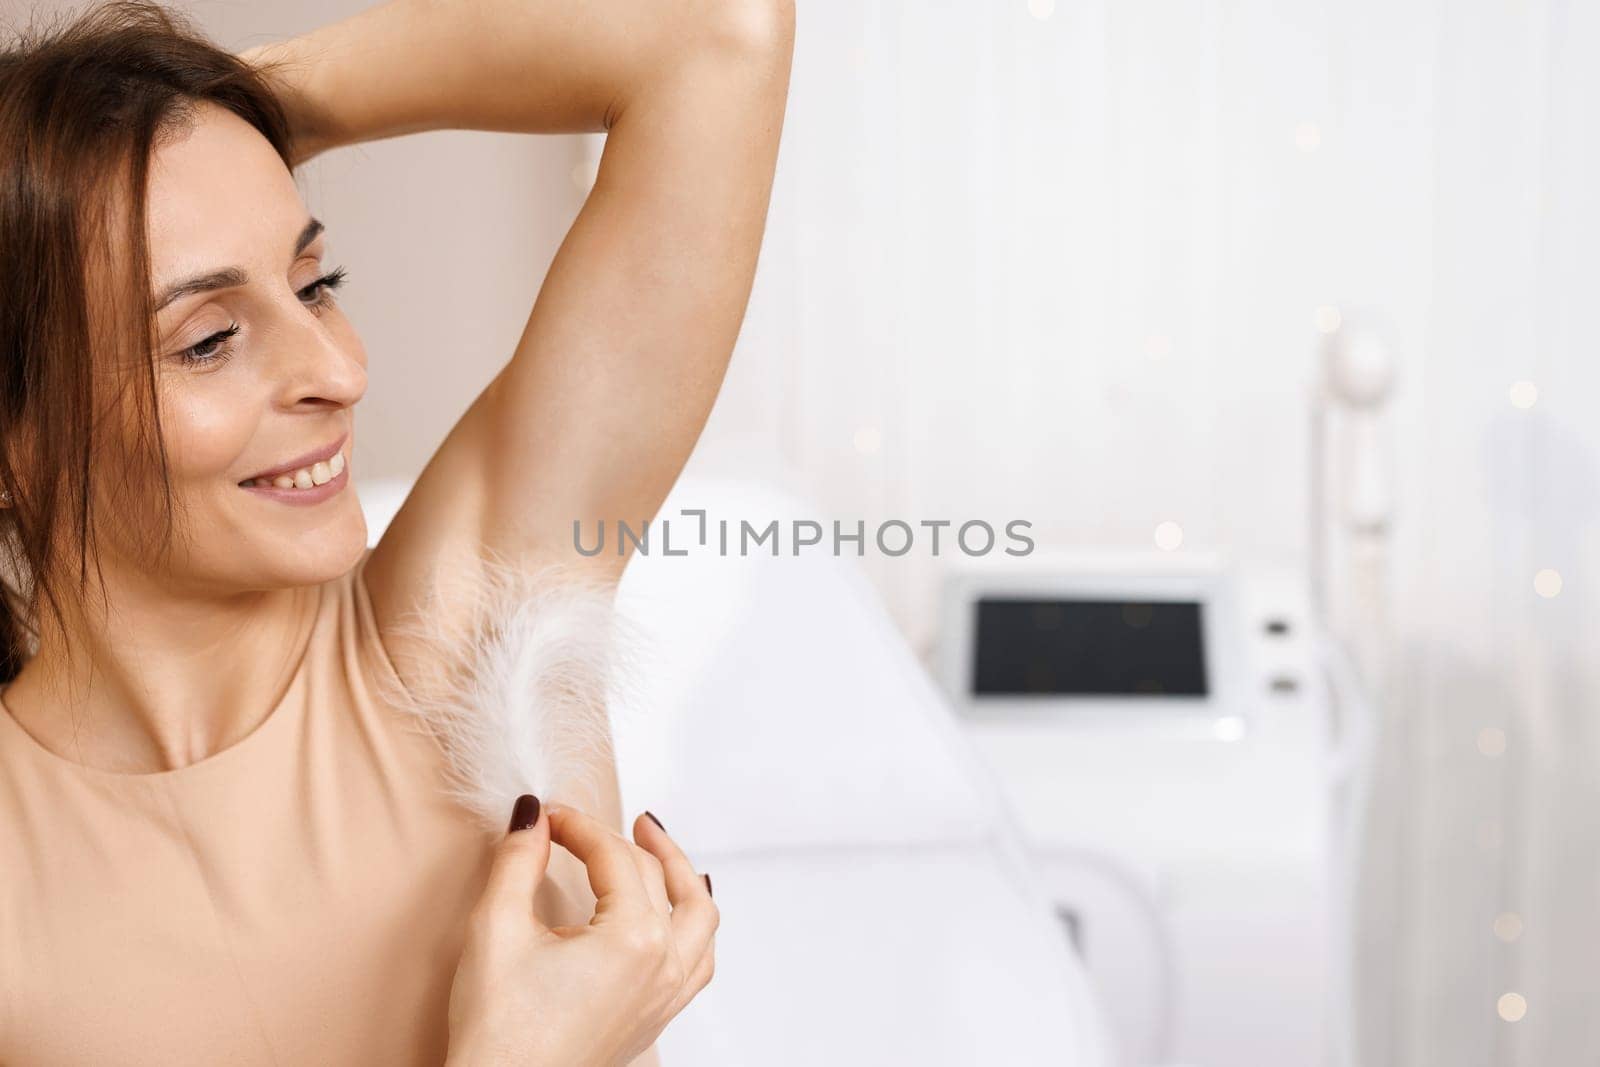 Armpit epilation, hair removal. Young woman holding her hands up and showing clean armpits, depilating smooth transparent skin. Portrait of beauty. Armpit care. Large white feather near the skin